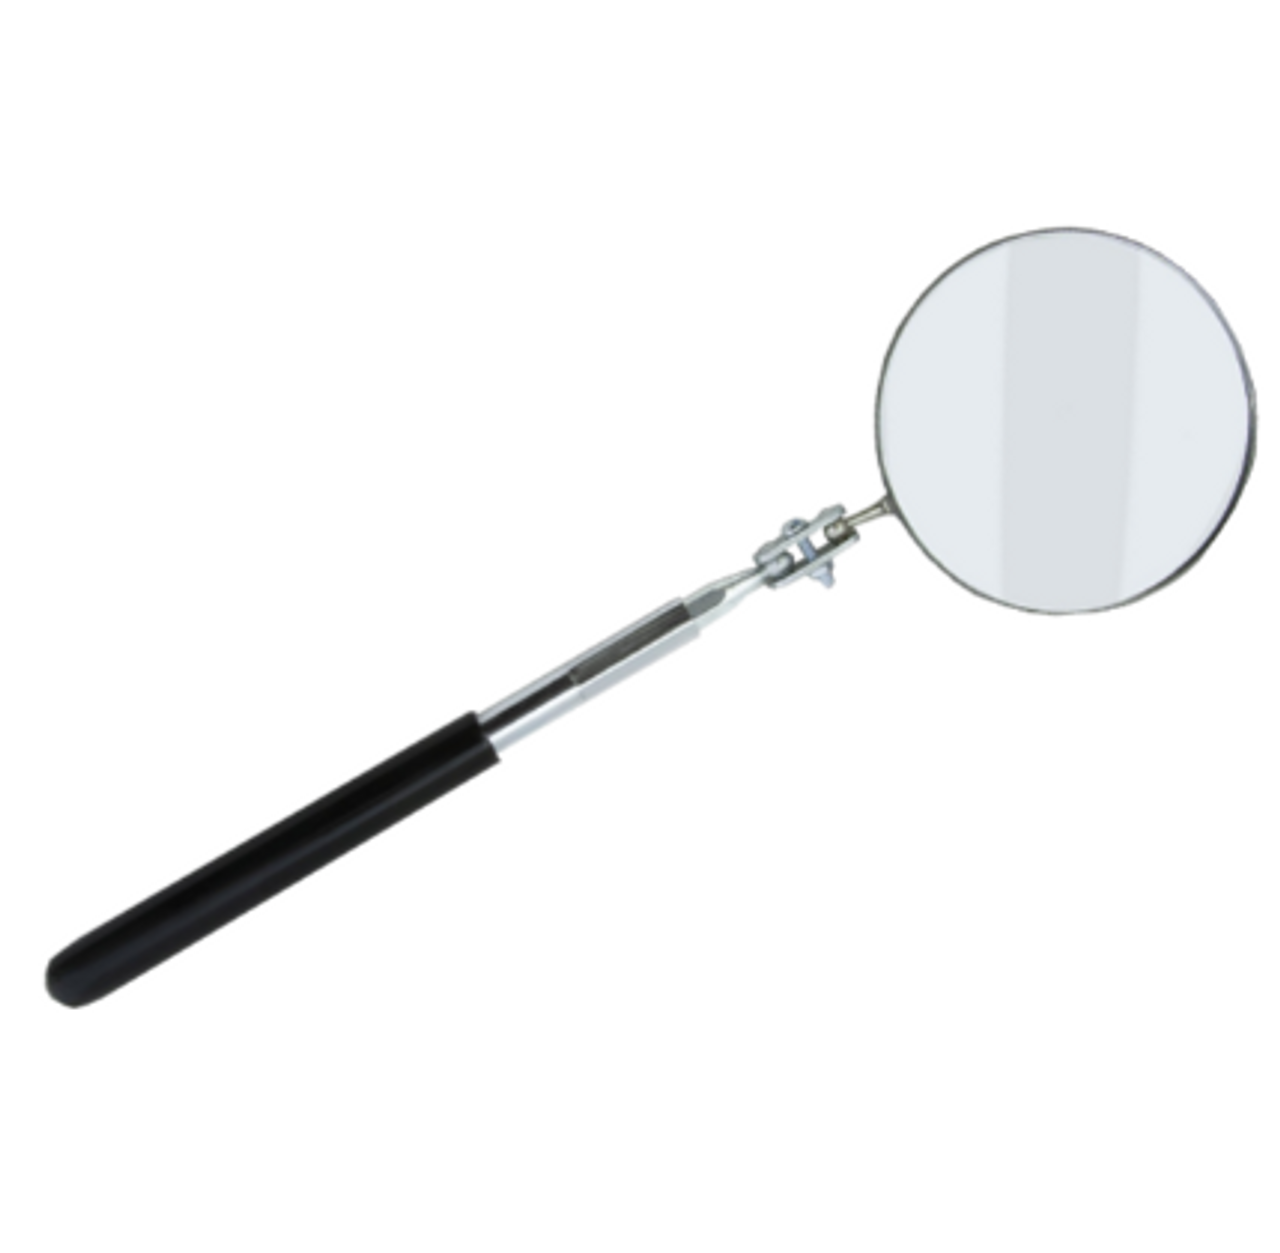 Telescopic inspection mirror for spillage